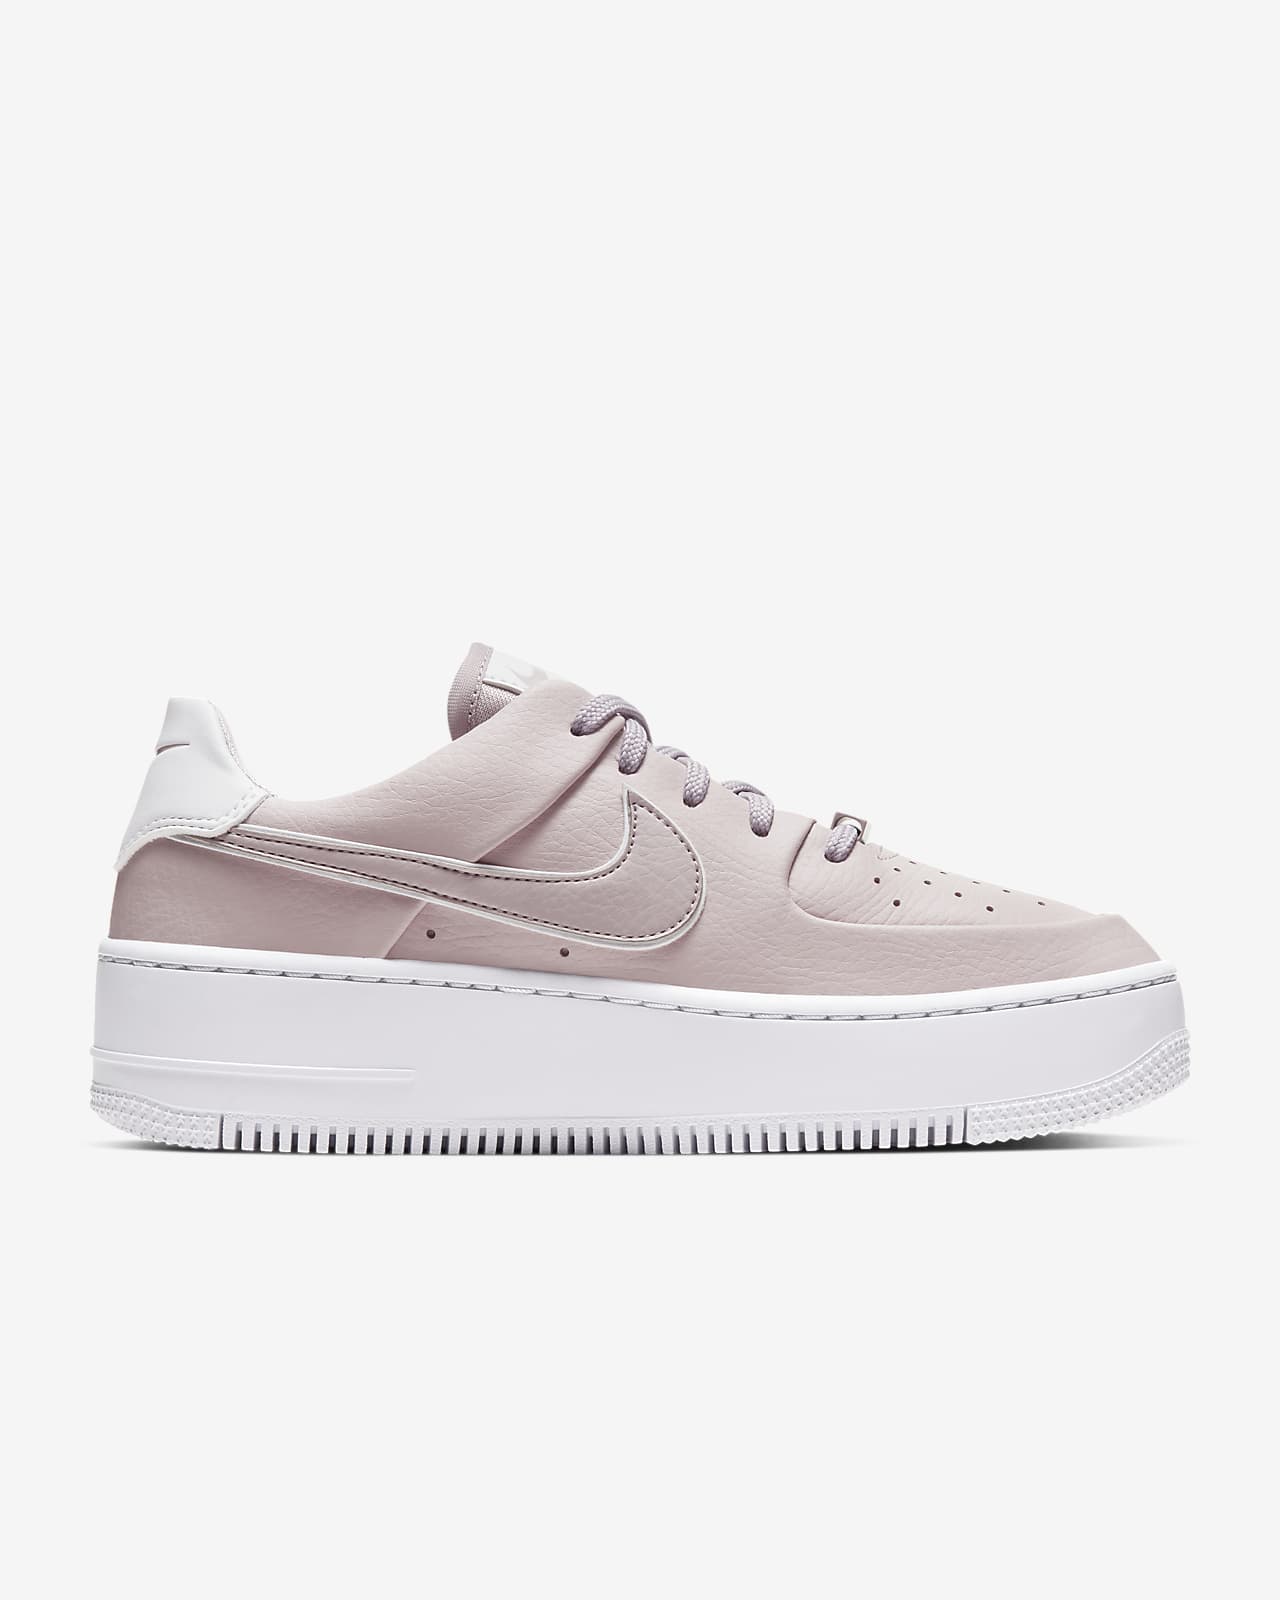 nike air force 1 low id women's